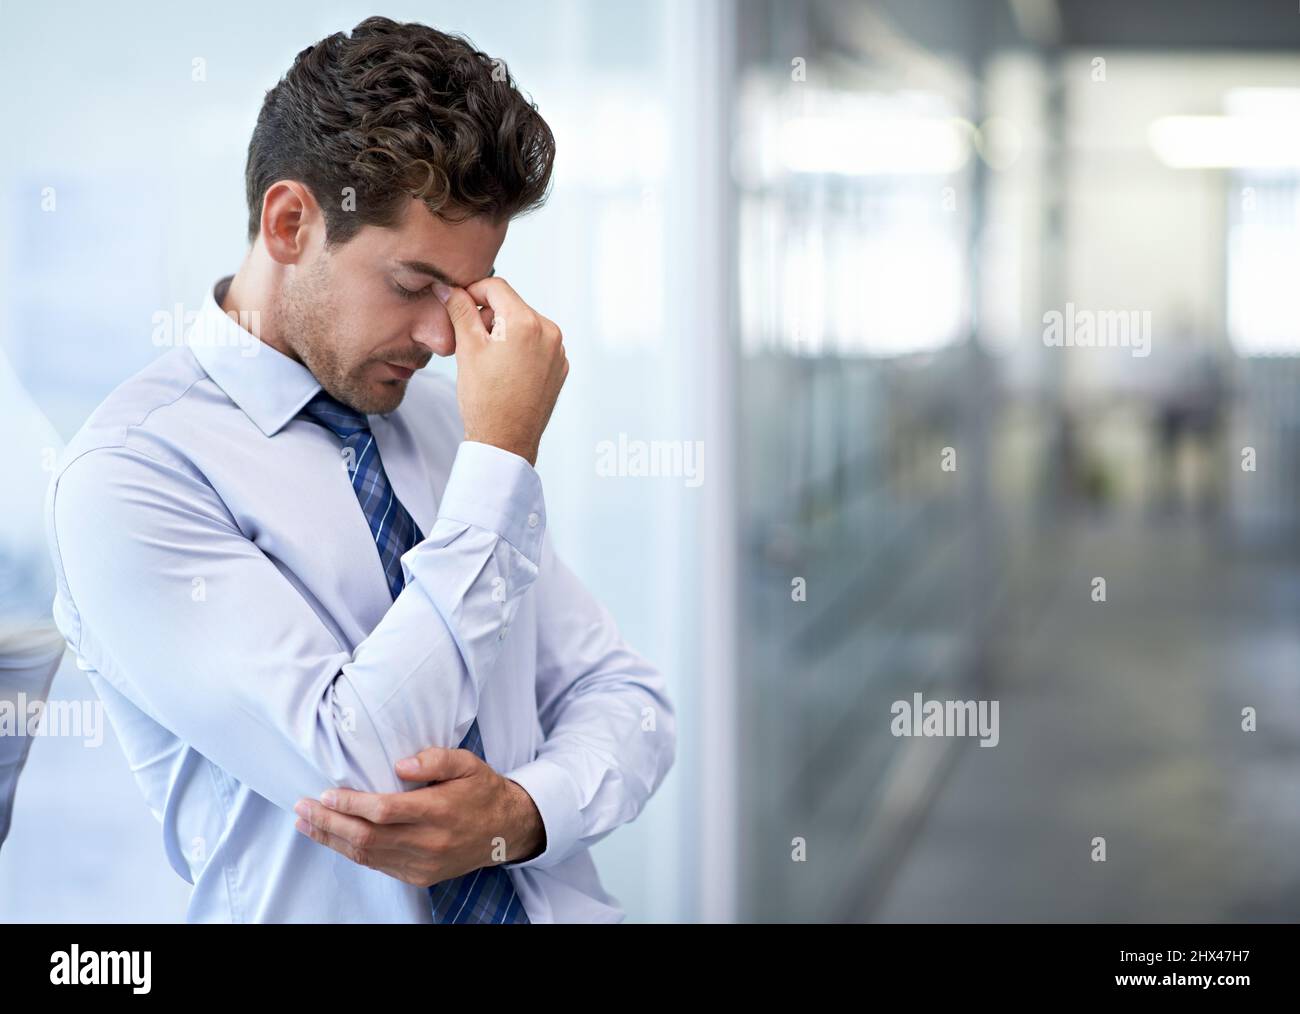 The pressure is just crazy. A young businessman looking stressed-out at the office. Stock Photo